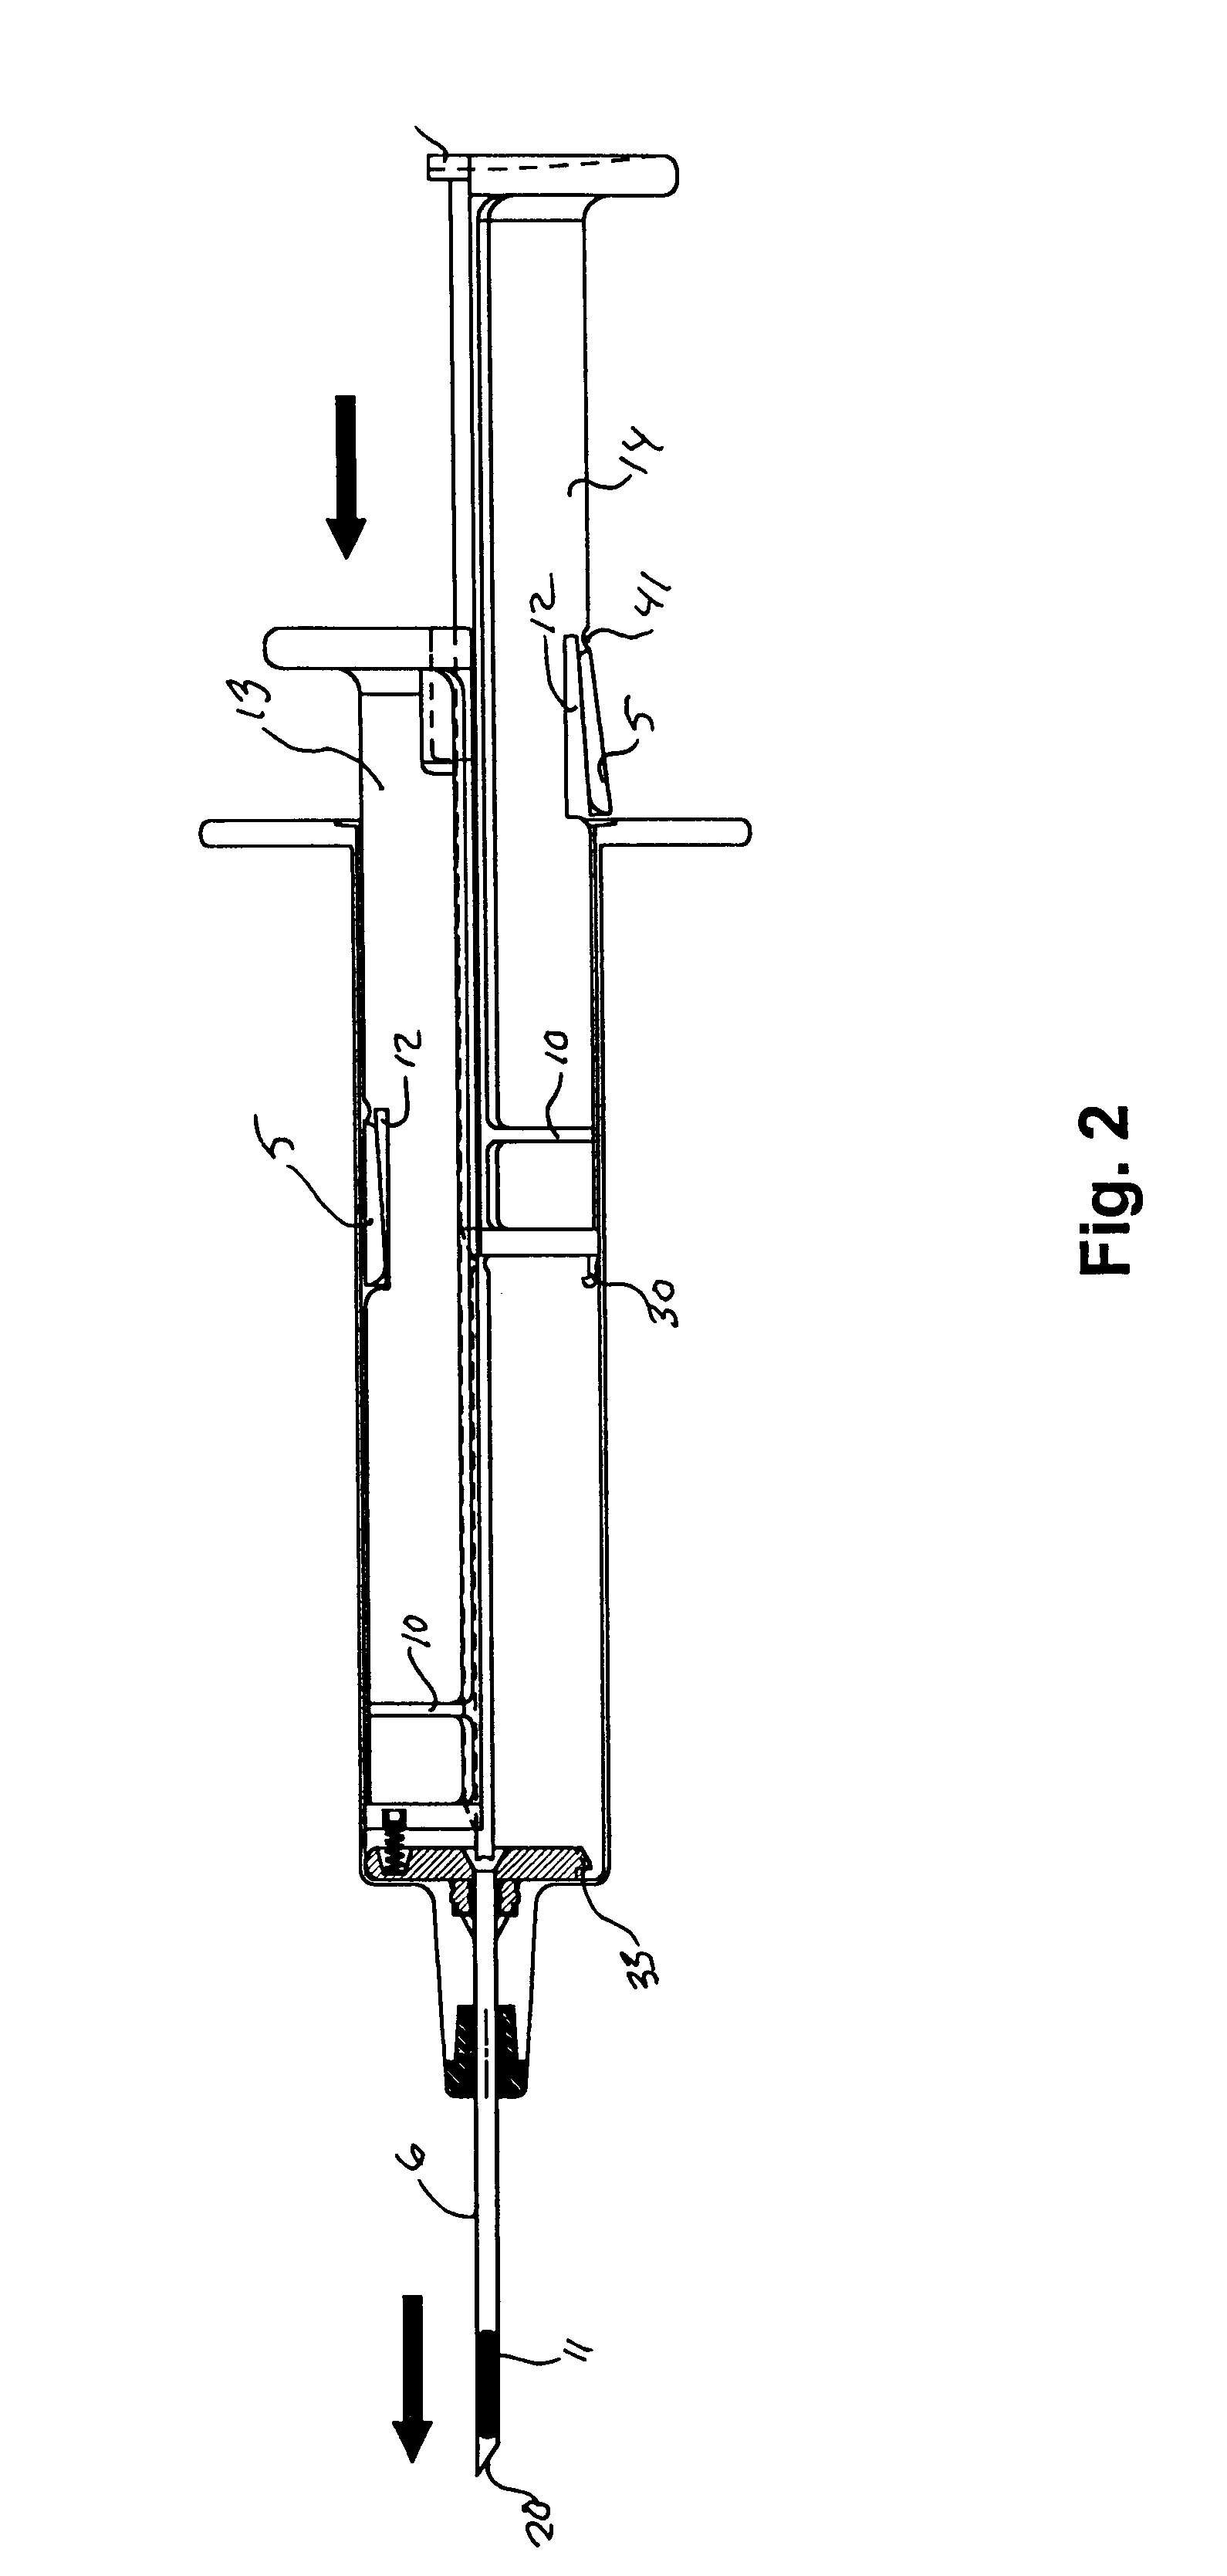 Hypodermic implant device